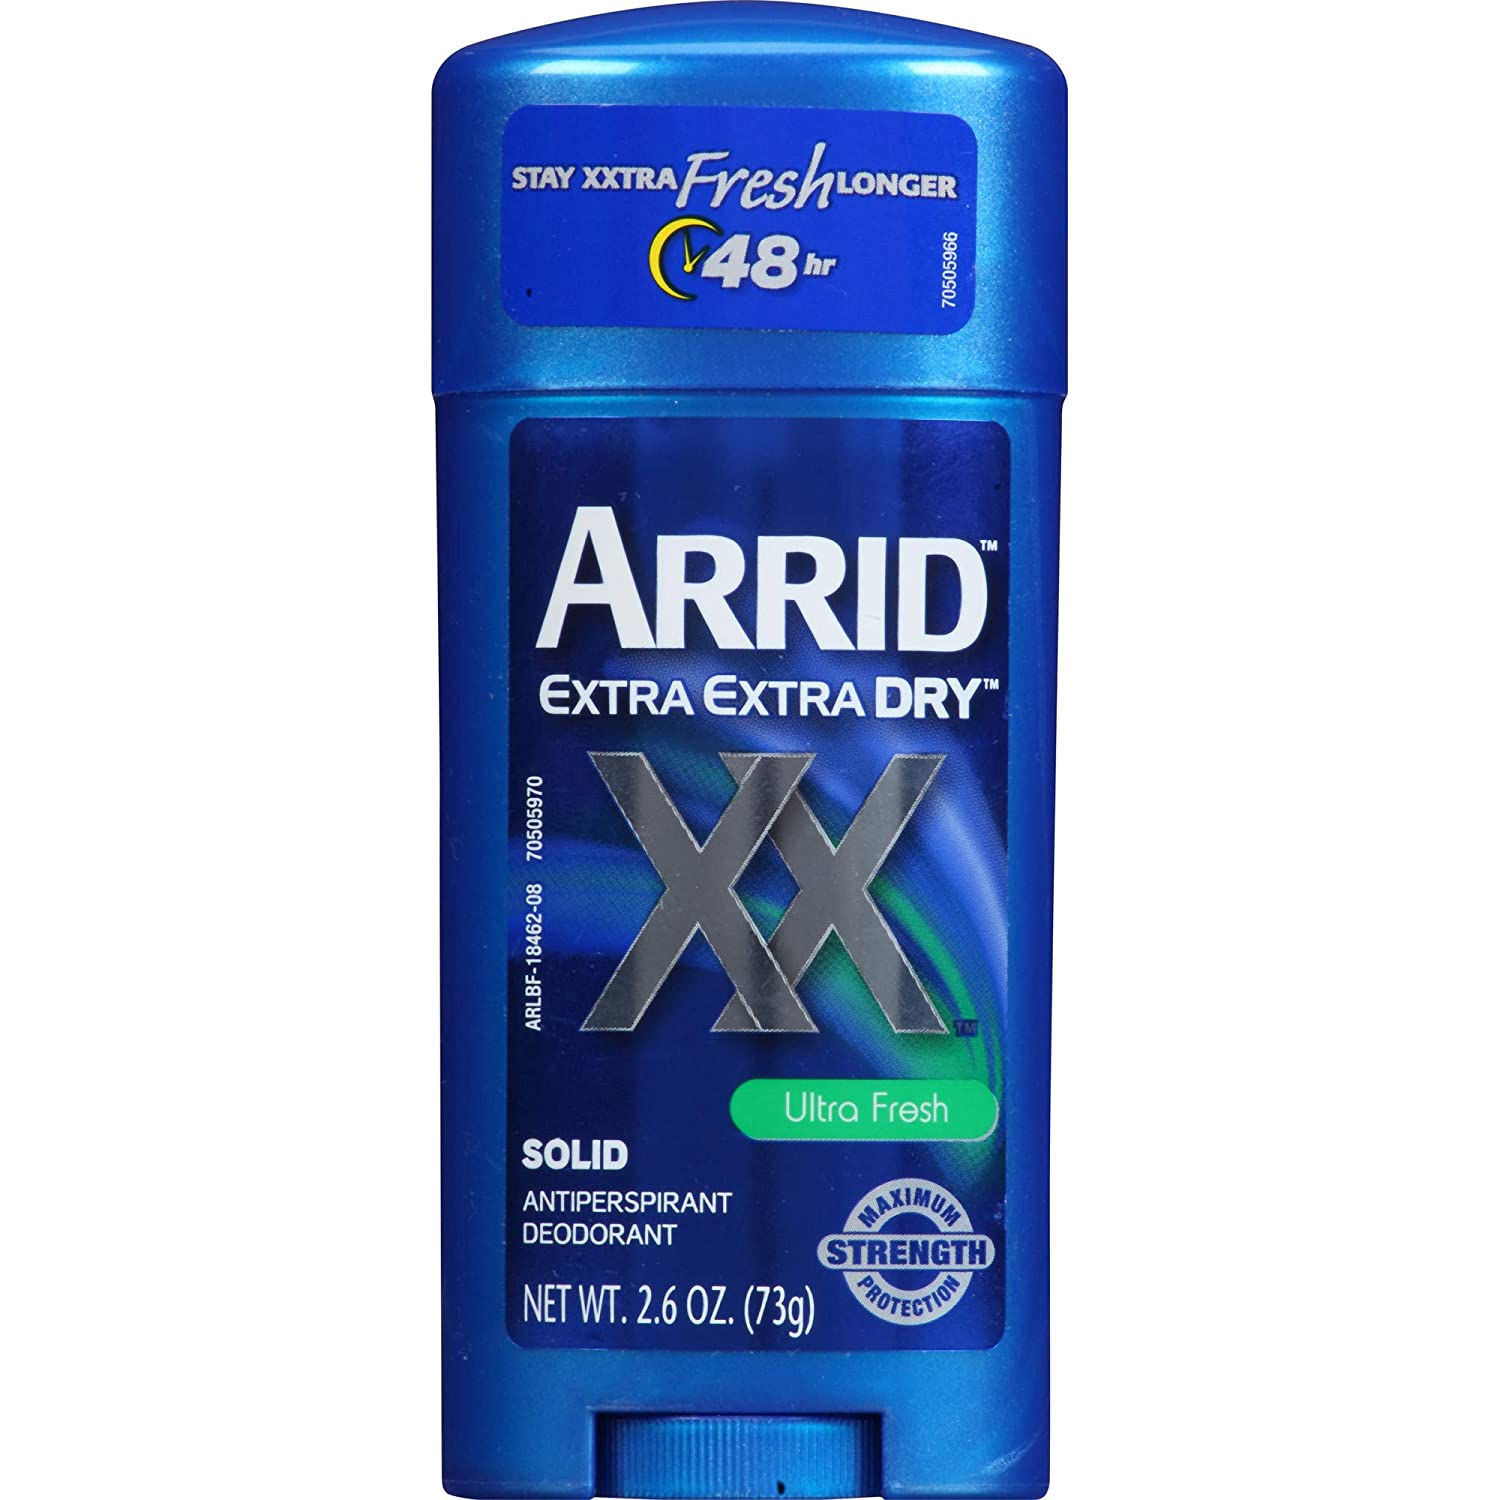 2.6oz Arrid XX Extra Extra Dry Solid Antiperspirant Deodorant (Ultra Fresh) $1.29 w/ Subscribe & Save